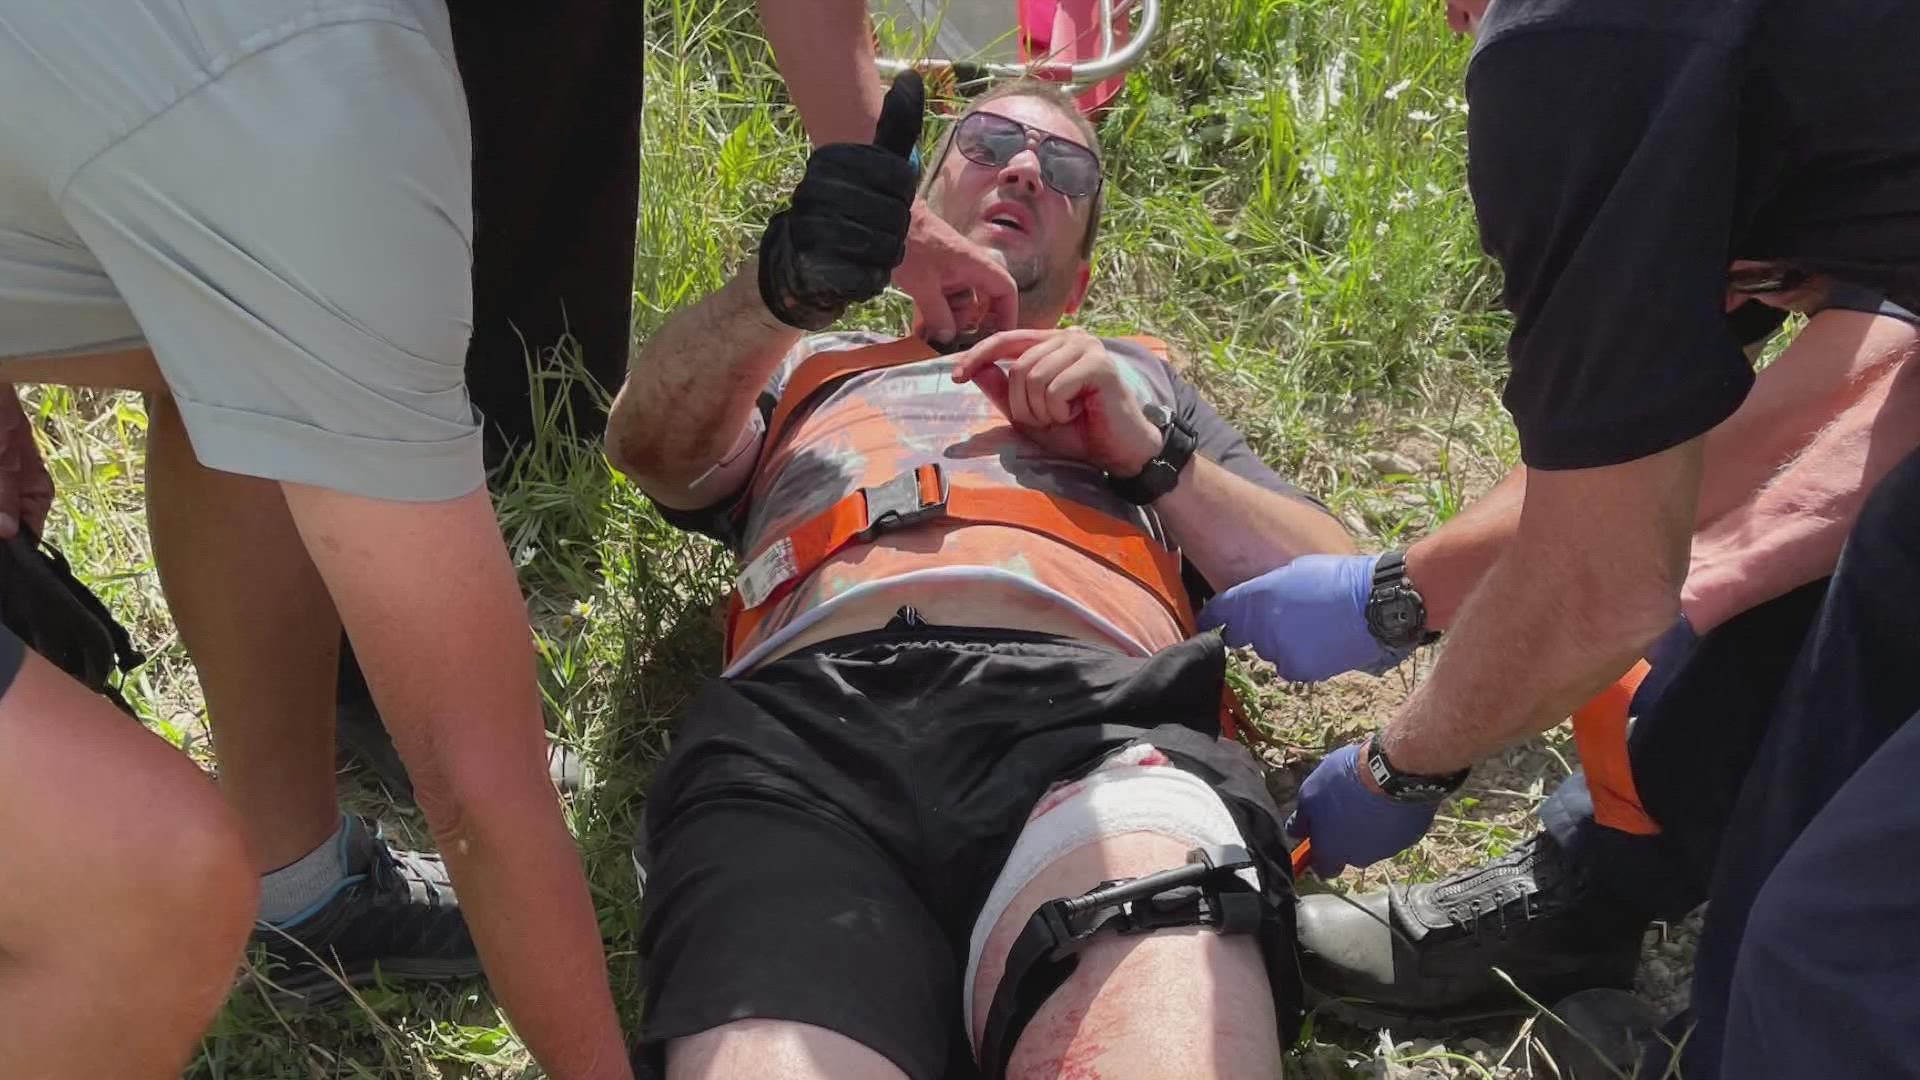 When John Crandall crashed his bike on the trail, part of his handlebar impaled his upper leg near his groin. Another cyclist nearby rushed to help.